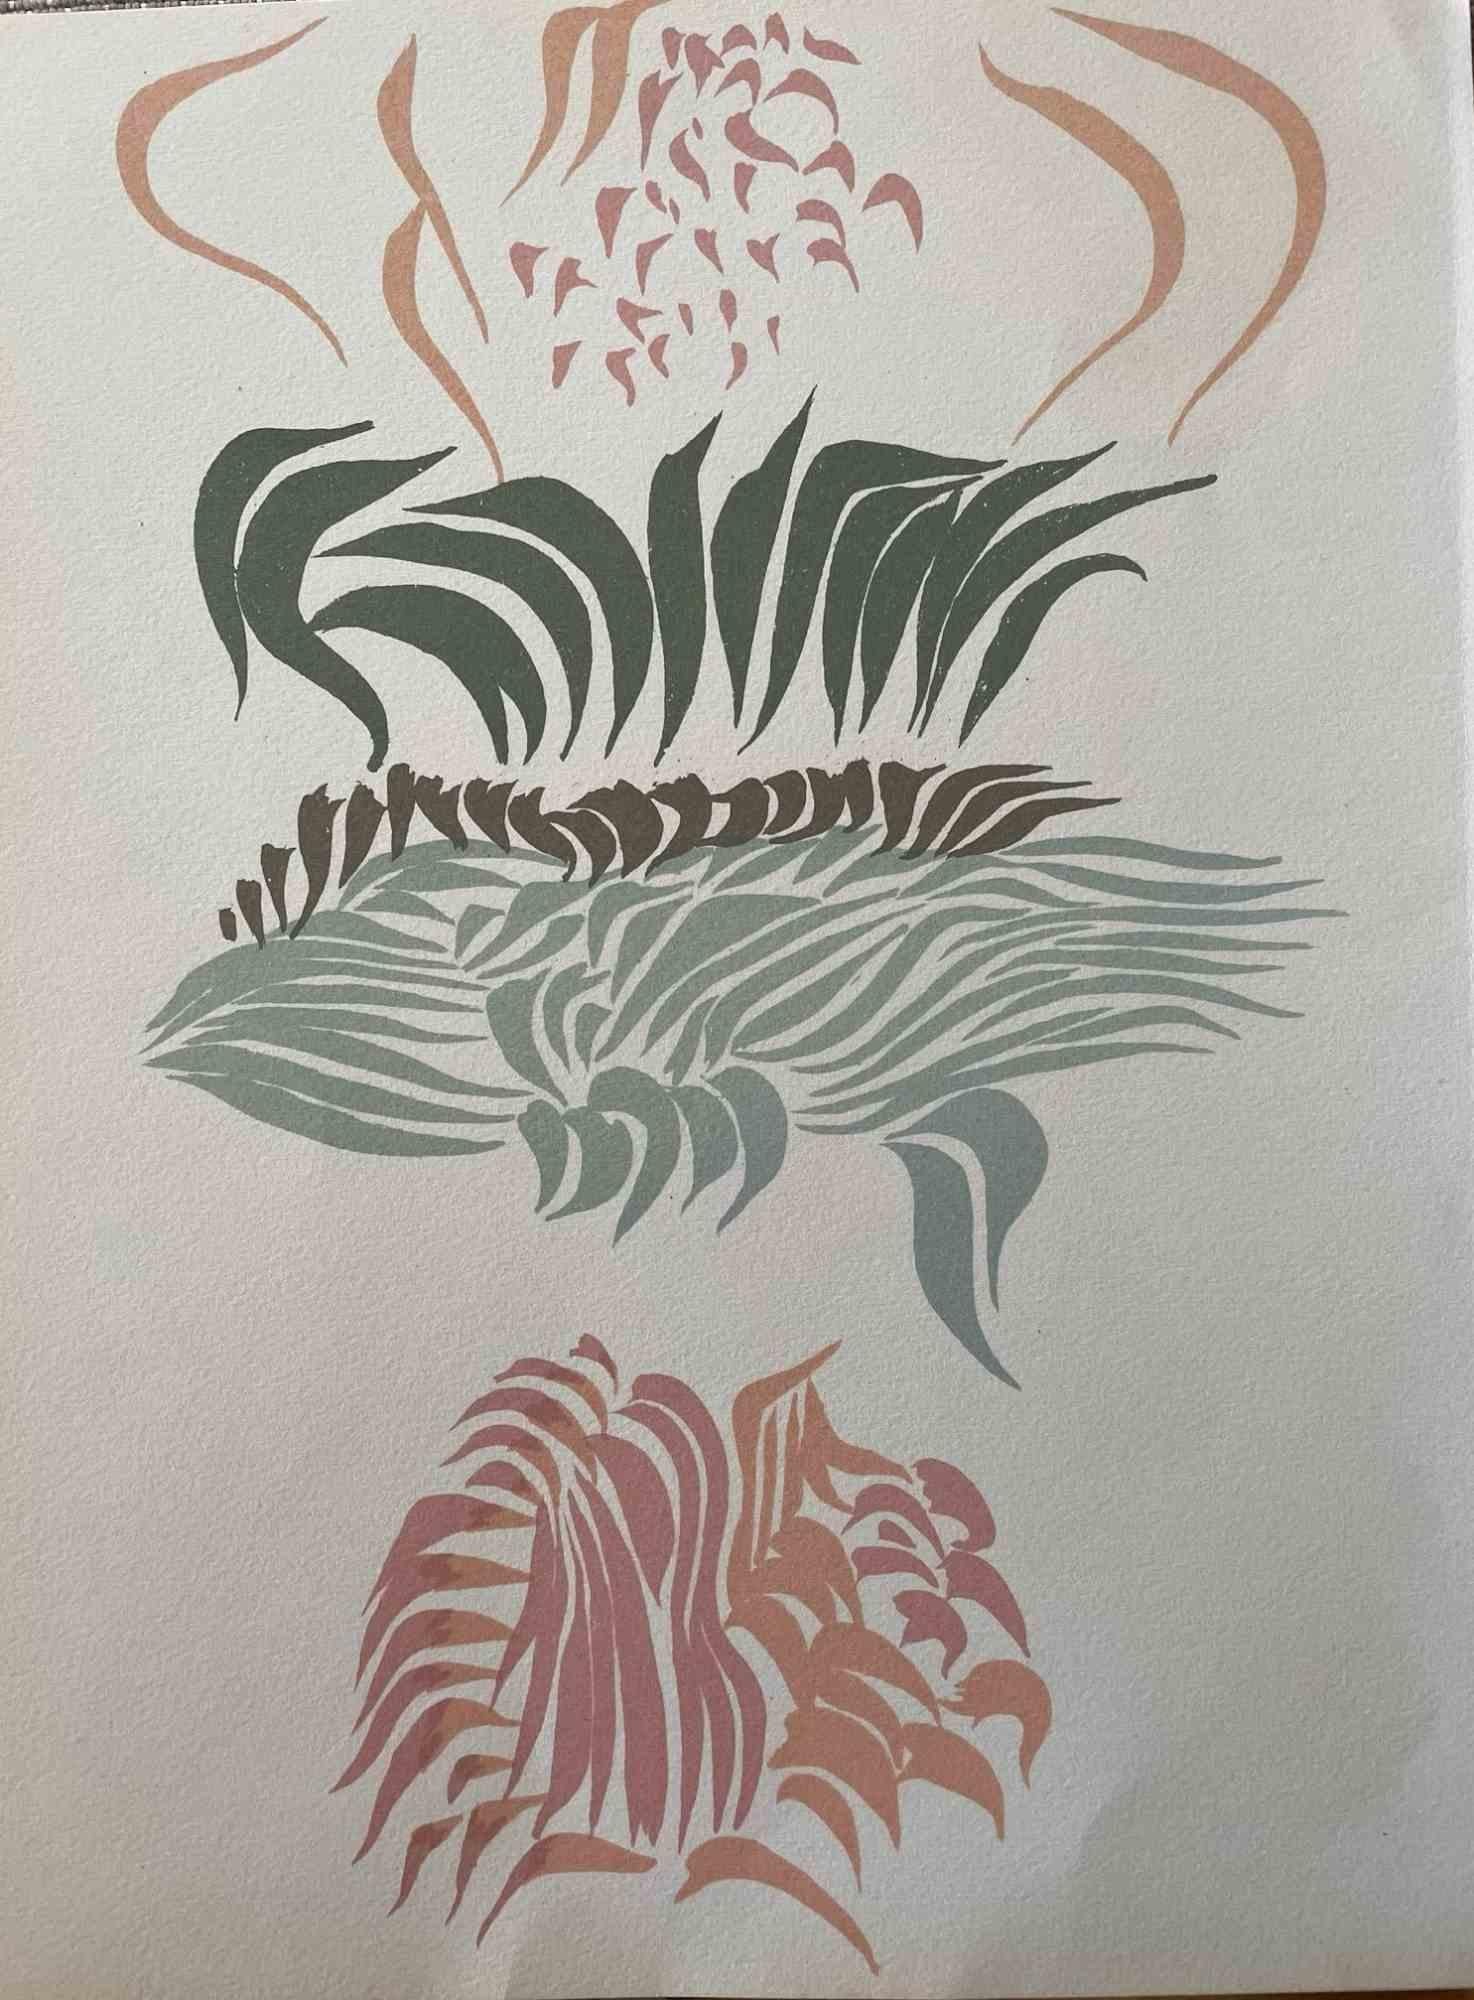 Jacques Herold Abstract Print - Untitled - Lithograph by J. Hérold - 1974